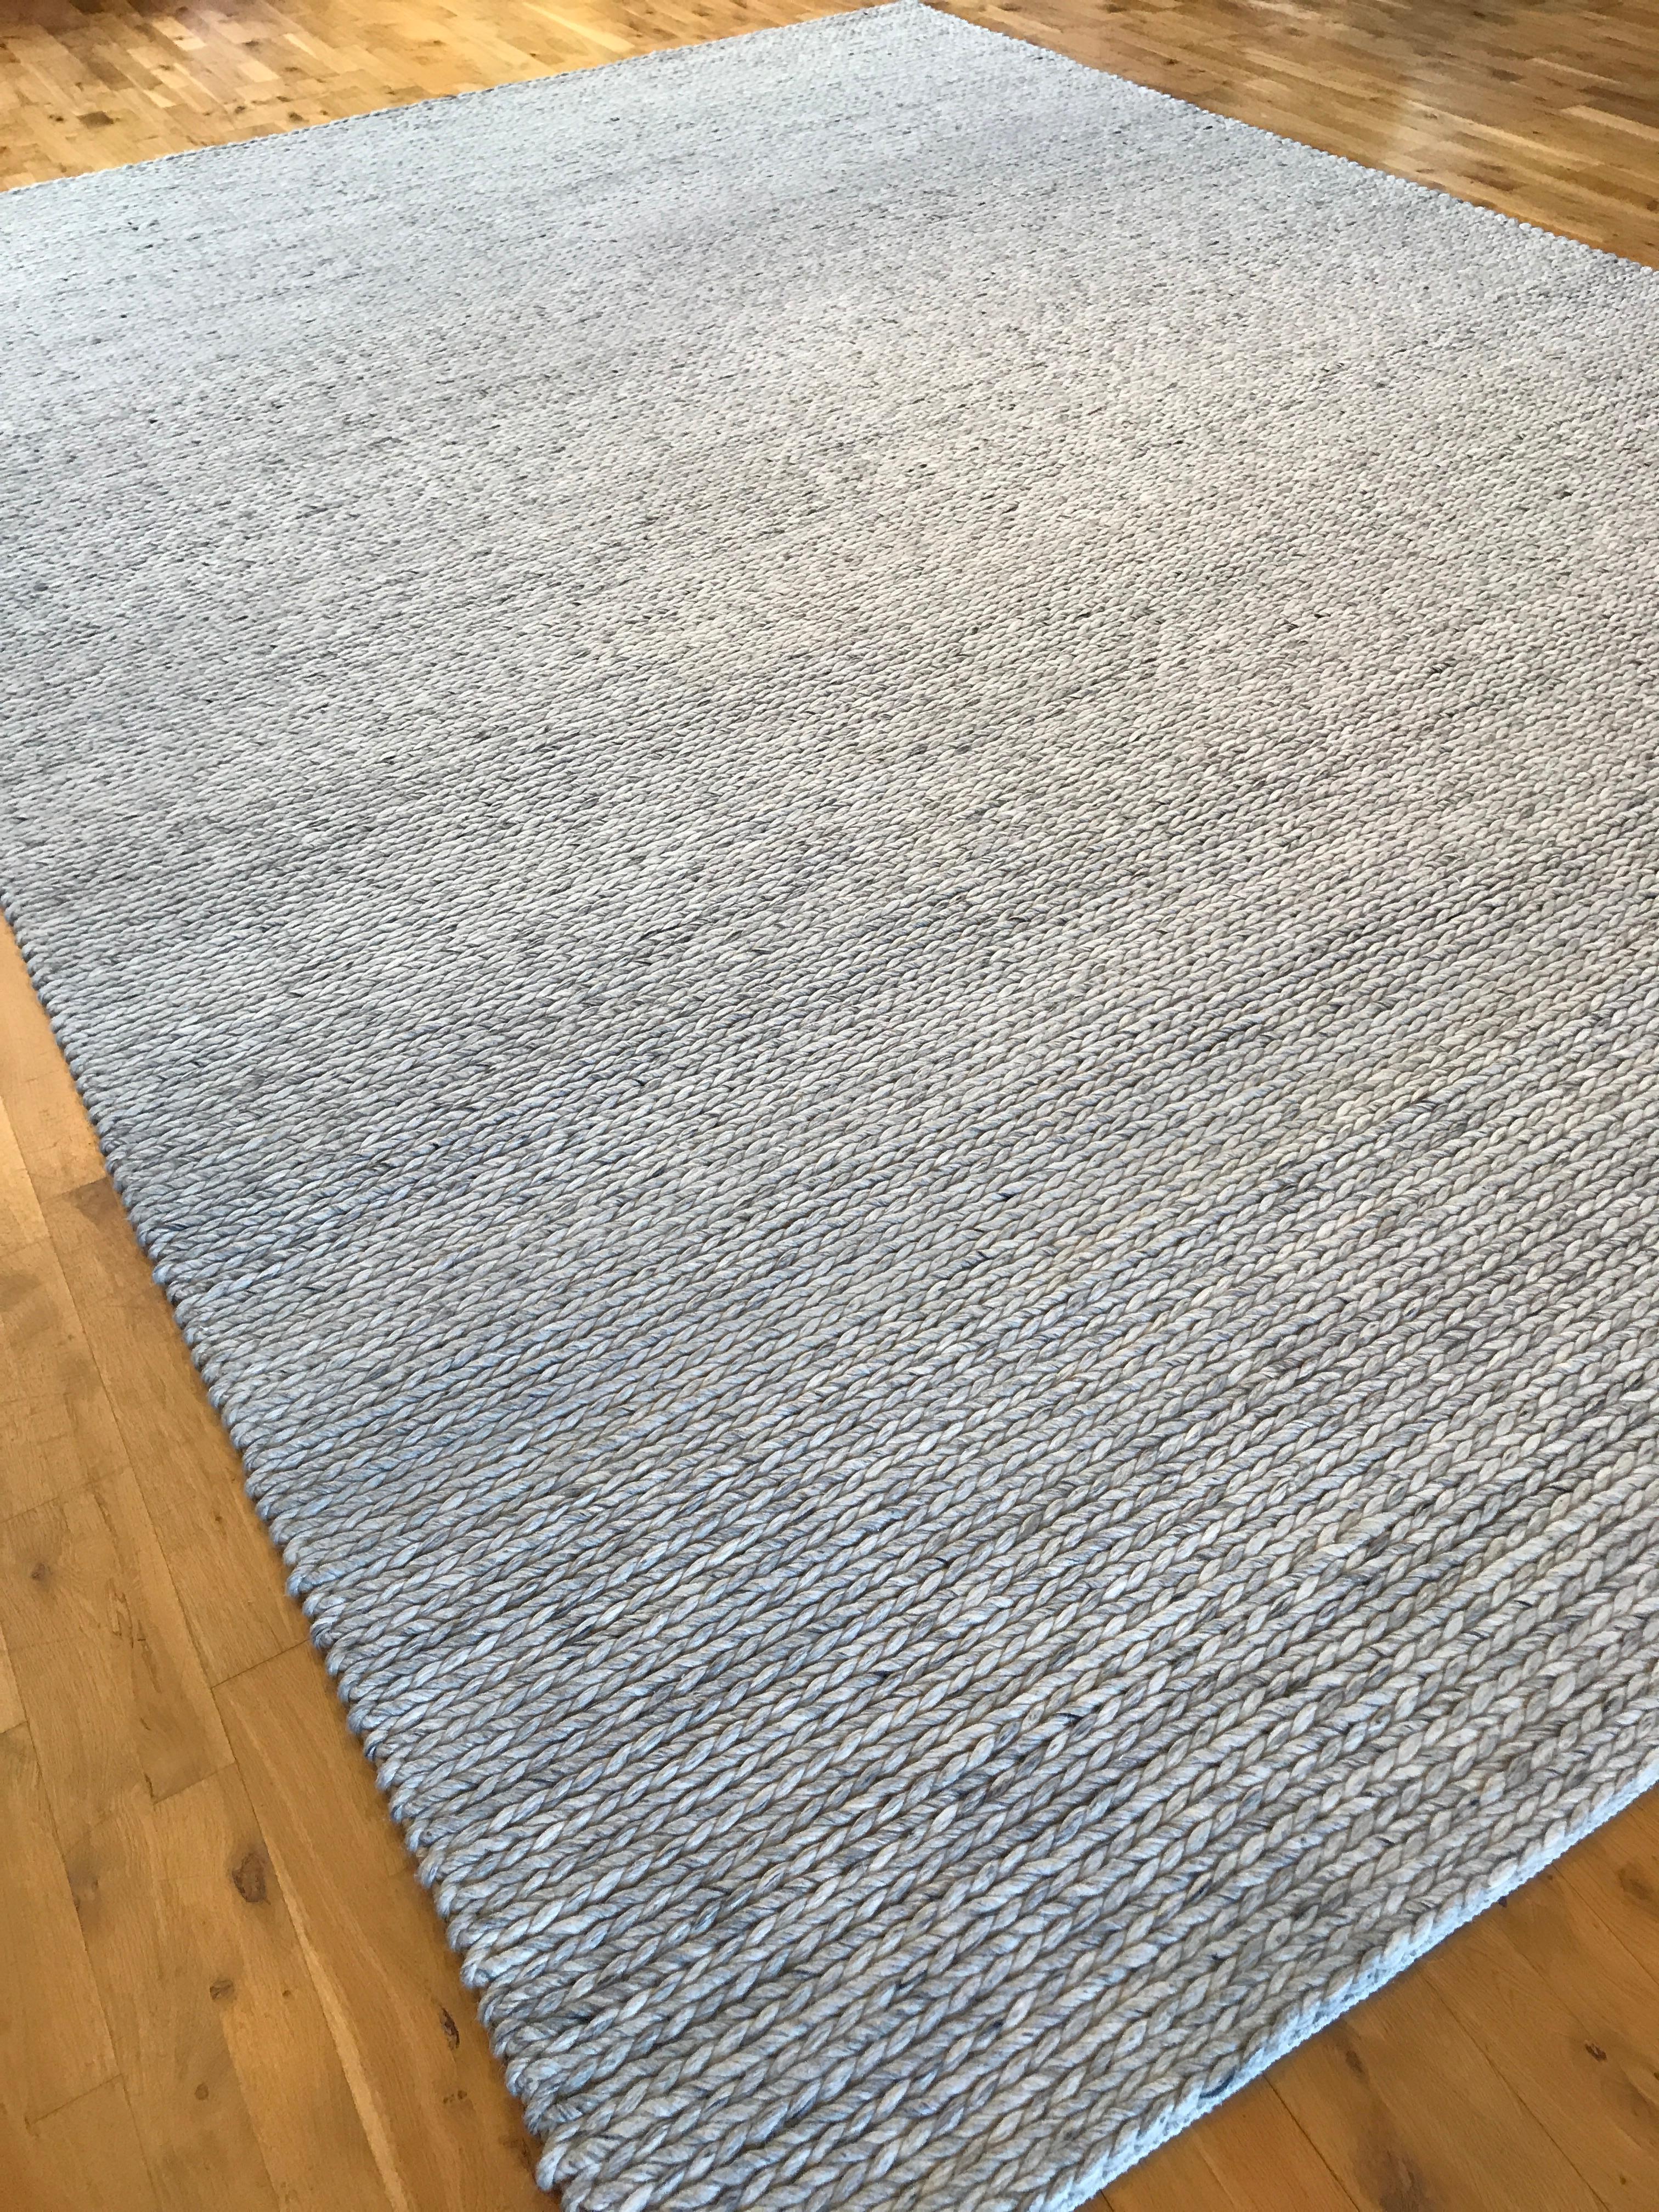 Hand-Knotted Oatmeal Braided Wool Area Rug For Sale